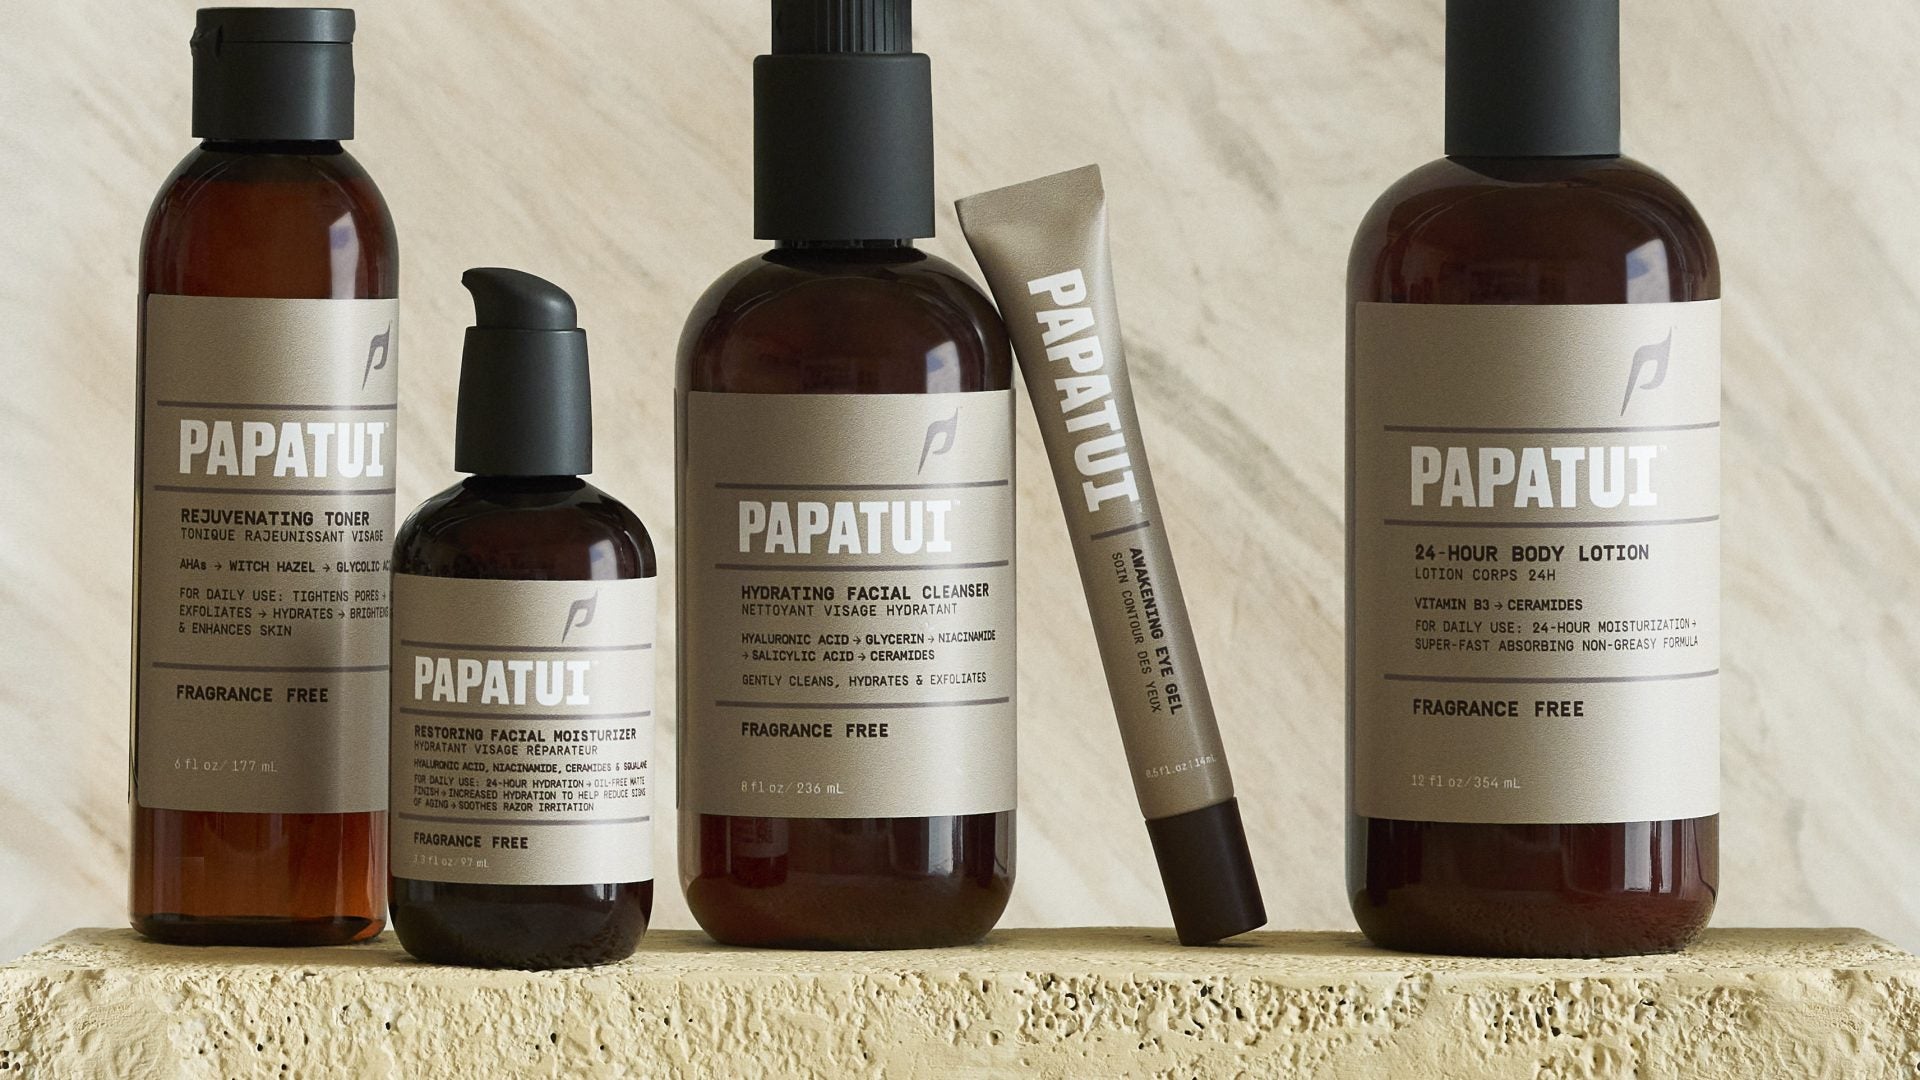 Dwayne Johnson Honors His Lineage With New Skincare Brand Papatui